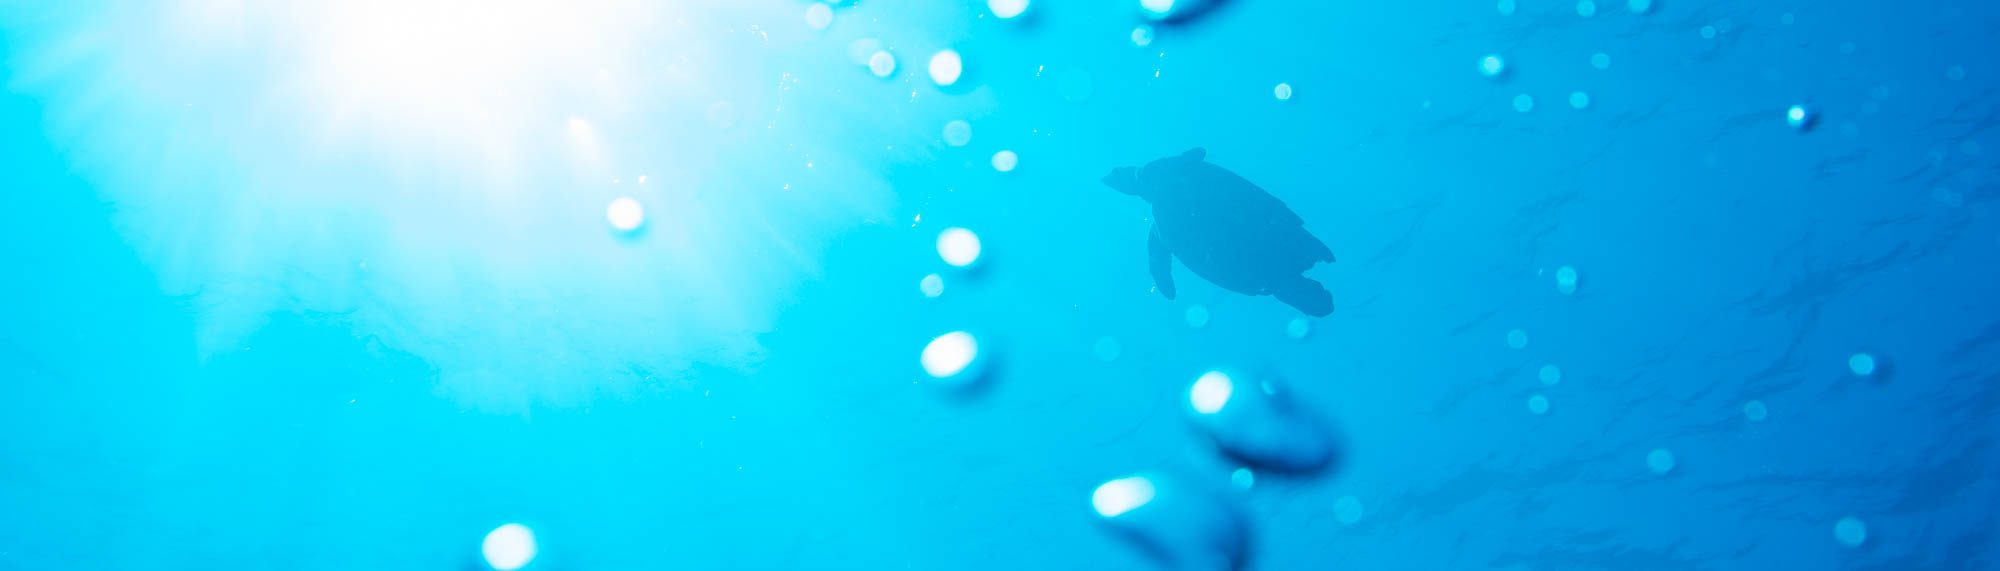 The image features a serene underwater scene with bubbles and a single turtle silhouette against a vibrant blue backdrop, with sunlight penetrating the ocean surface.